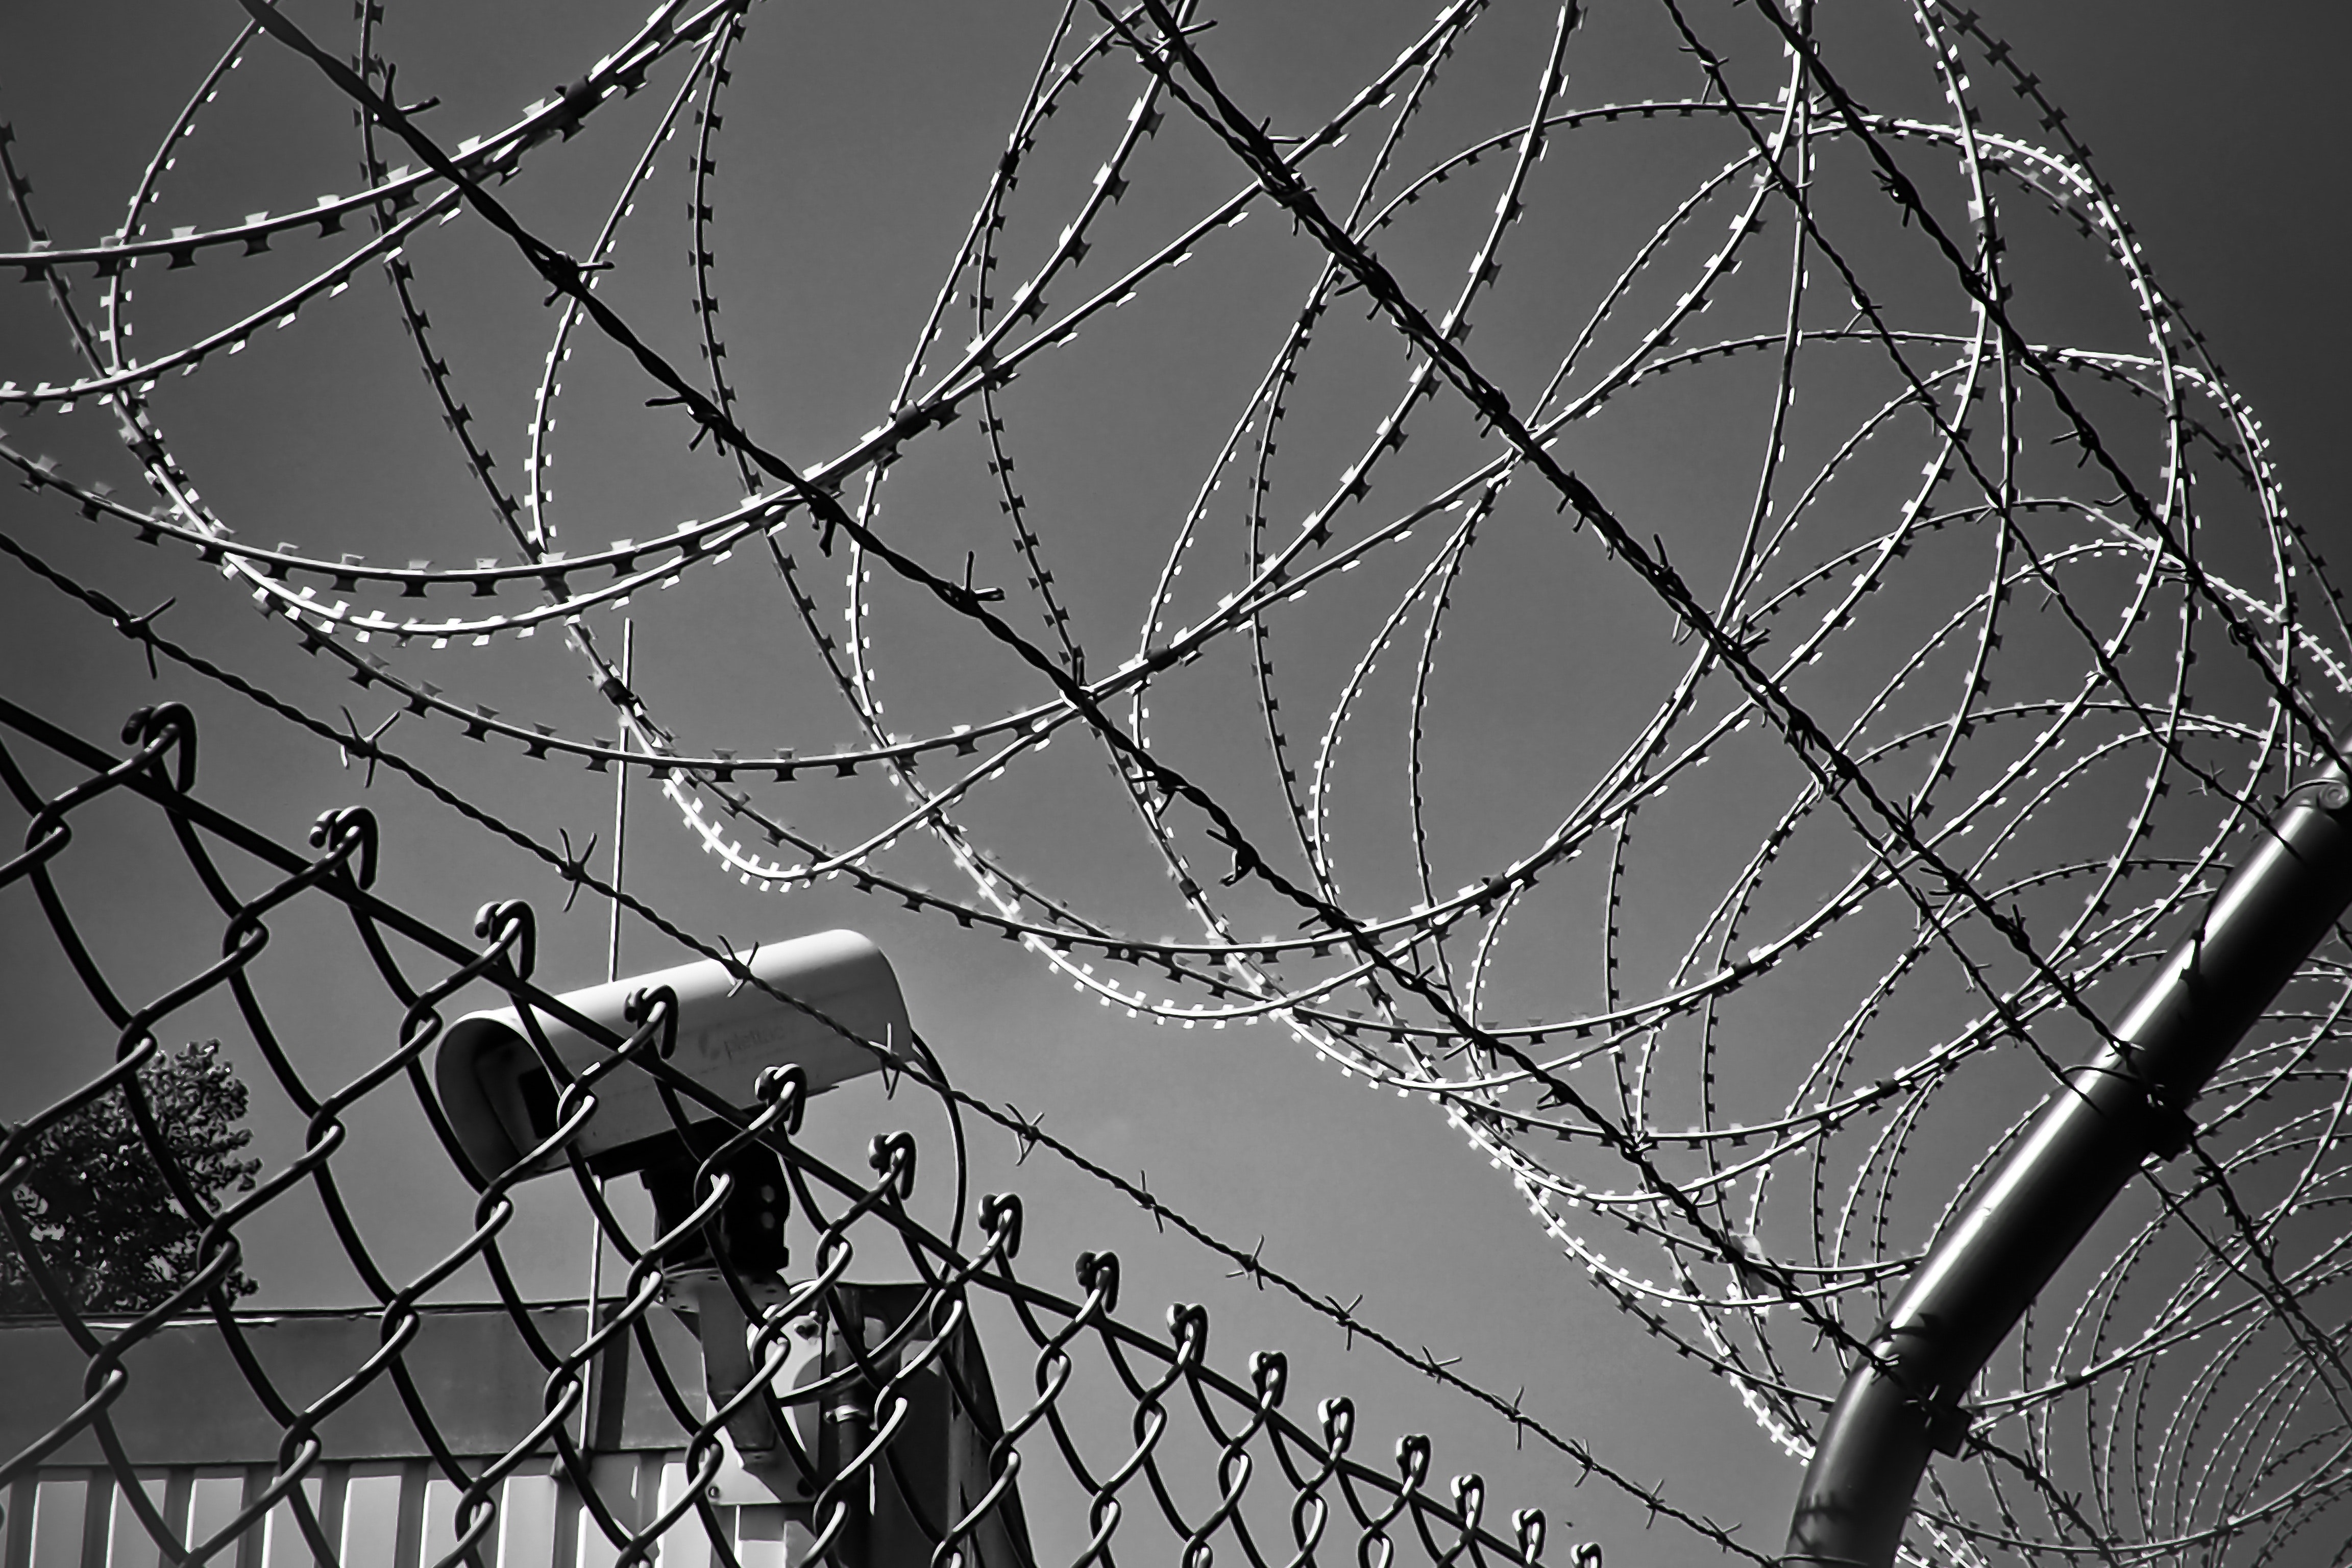 abstract barbed wire black white 274886 - Surveillance